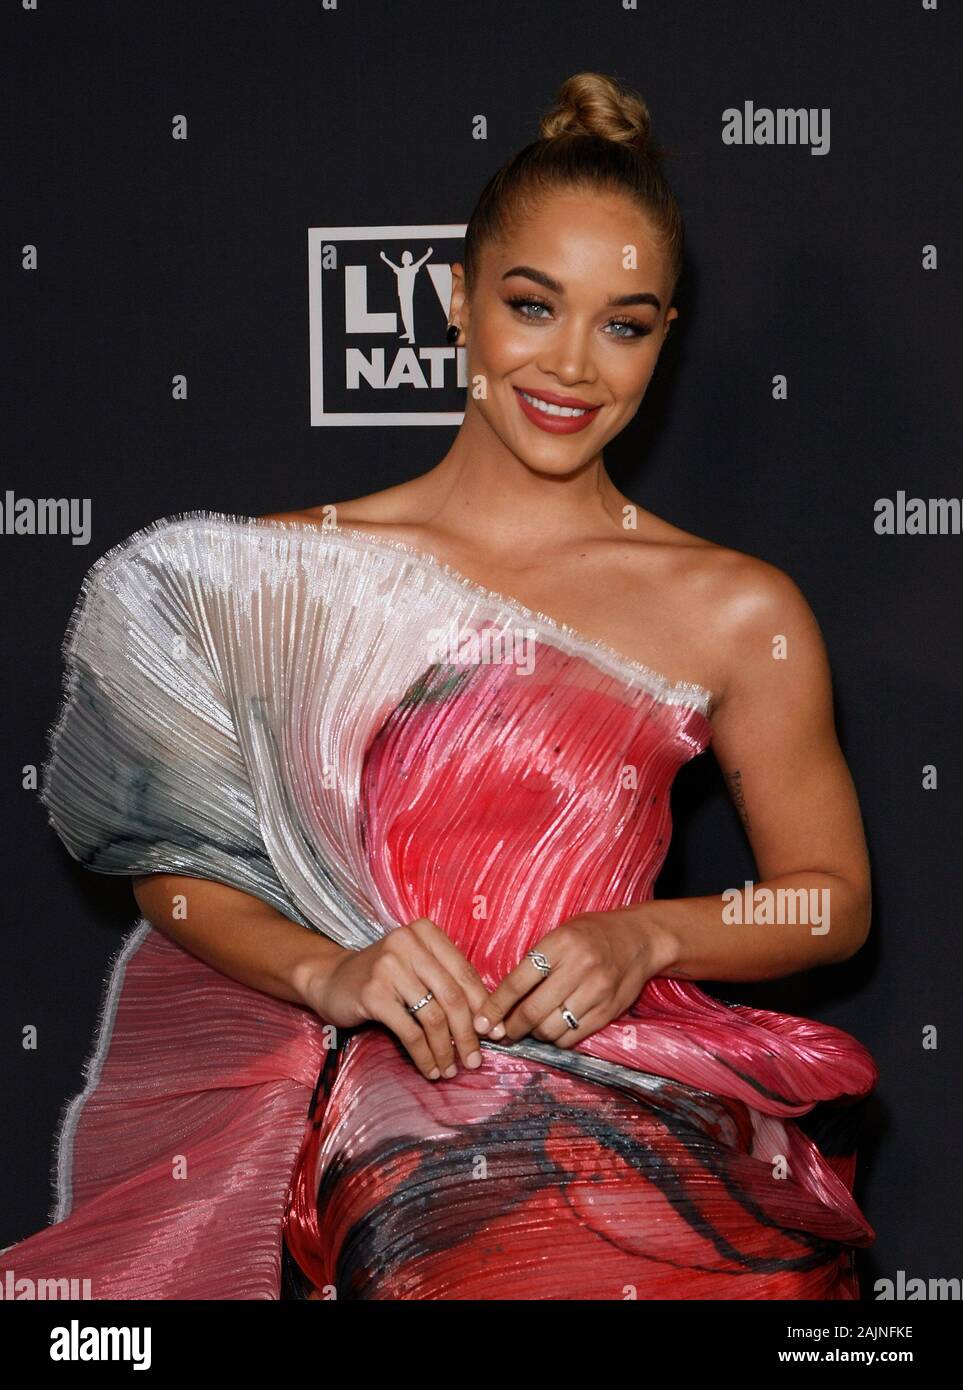 Los Angeles, USA. 04th Jan, 2020. LOS ANGELES, CALIFORNIA - JANUARY 04: Jasmine Sanders attends The Art Of Elysium's 13th Annual Celebration - Heaven at Hollywood Palladium on January 04, 2020 in Los Angeles, California. Credit: MediaPunch Inc/Alamy Live News Stock Photo